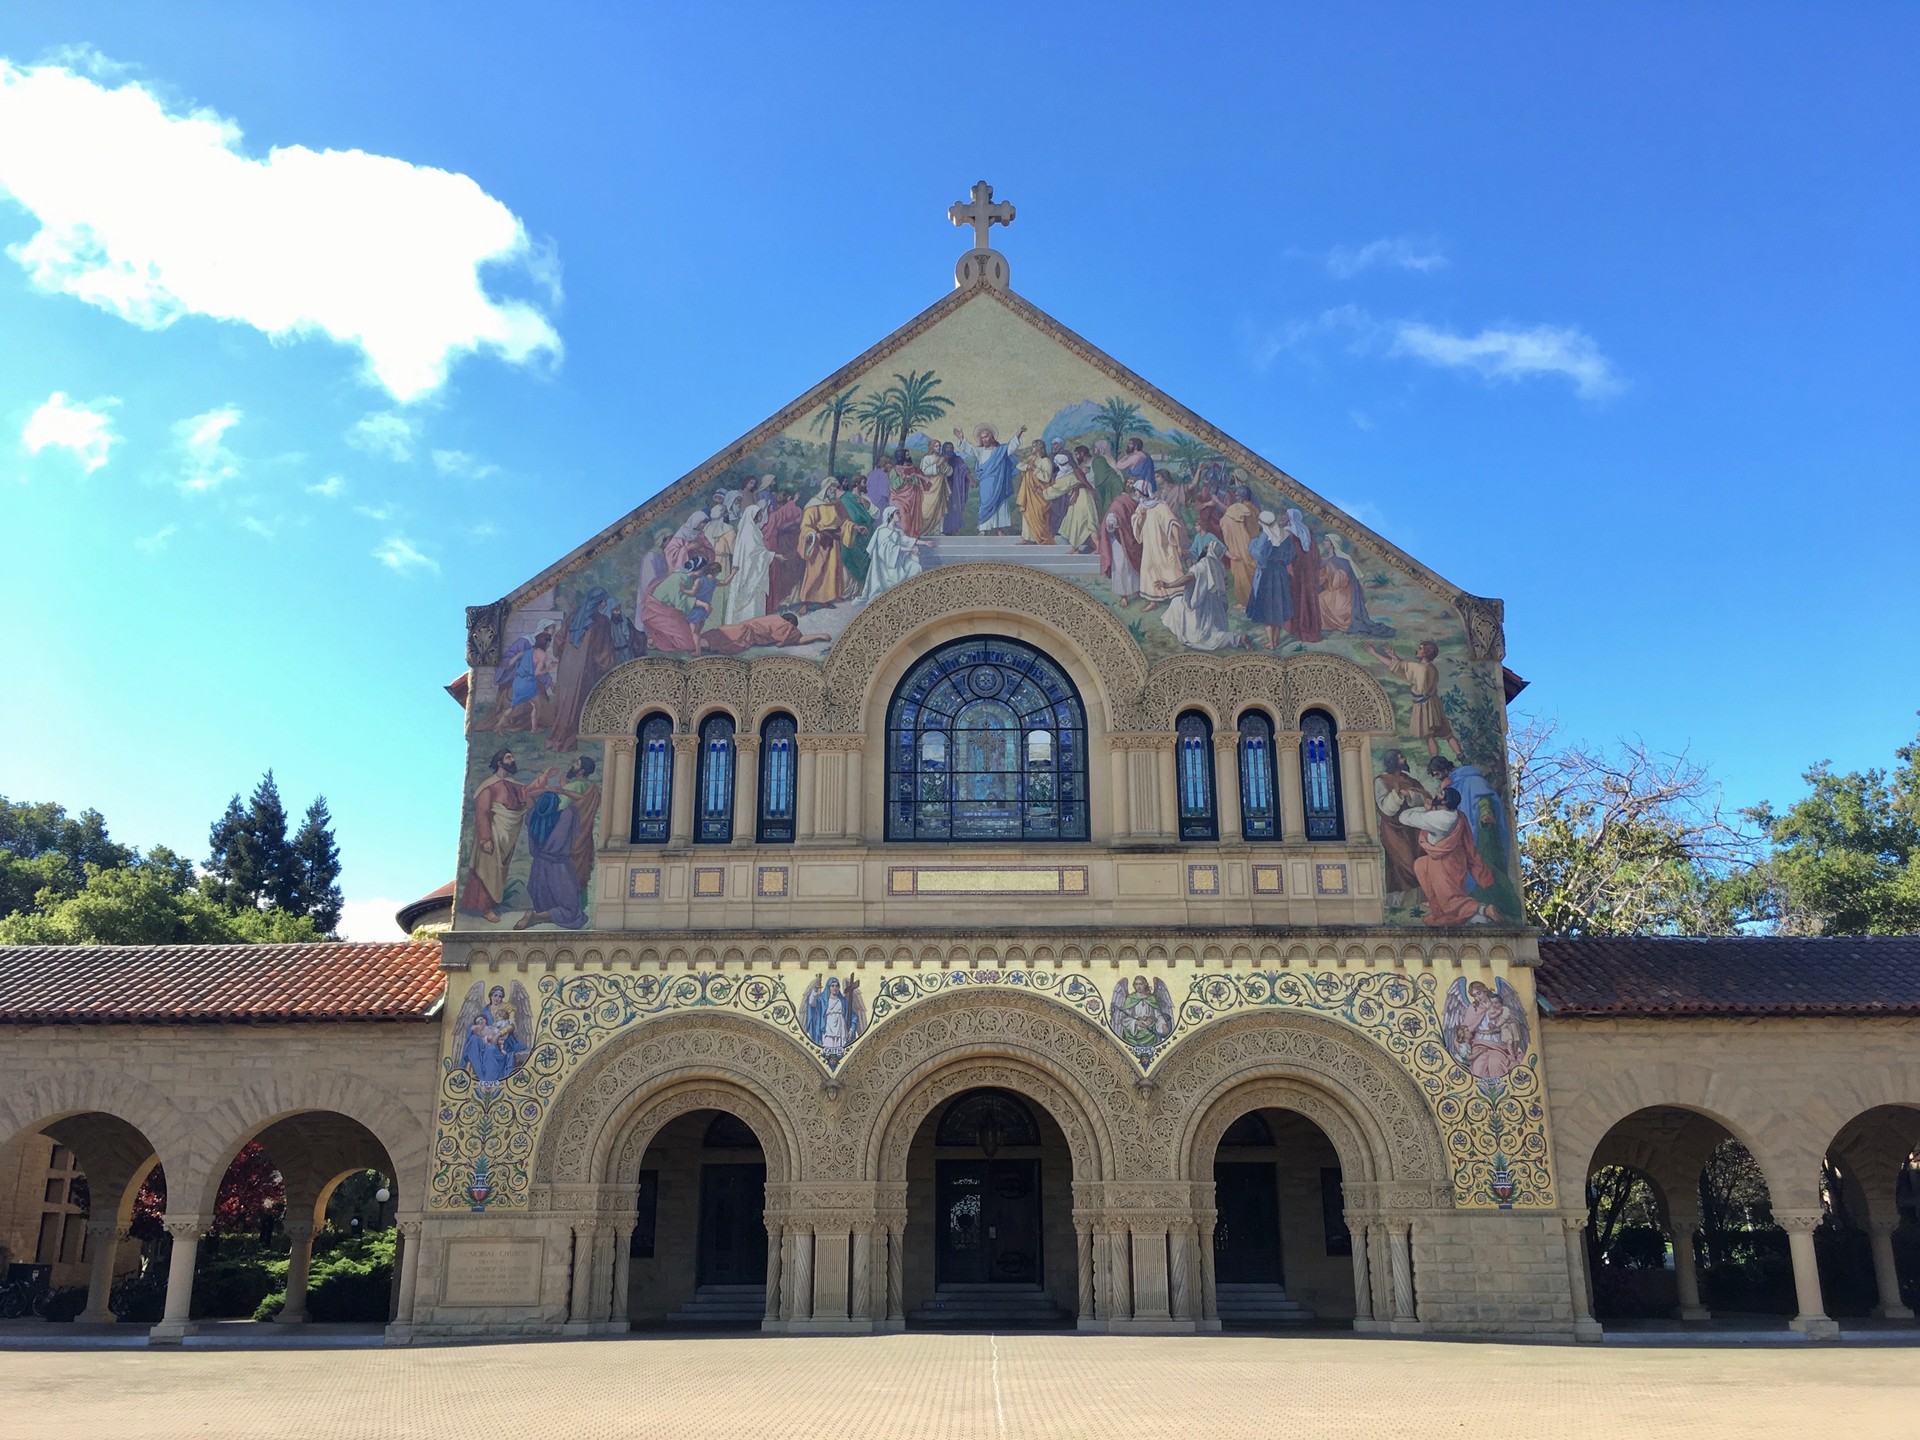 Once the Santa Clara County Planning Commission decides on a recommendation, yes or no, the Board of Supervisors will vote on whether to approve Stanford's general use plan.